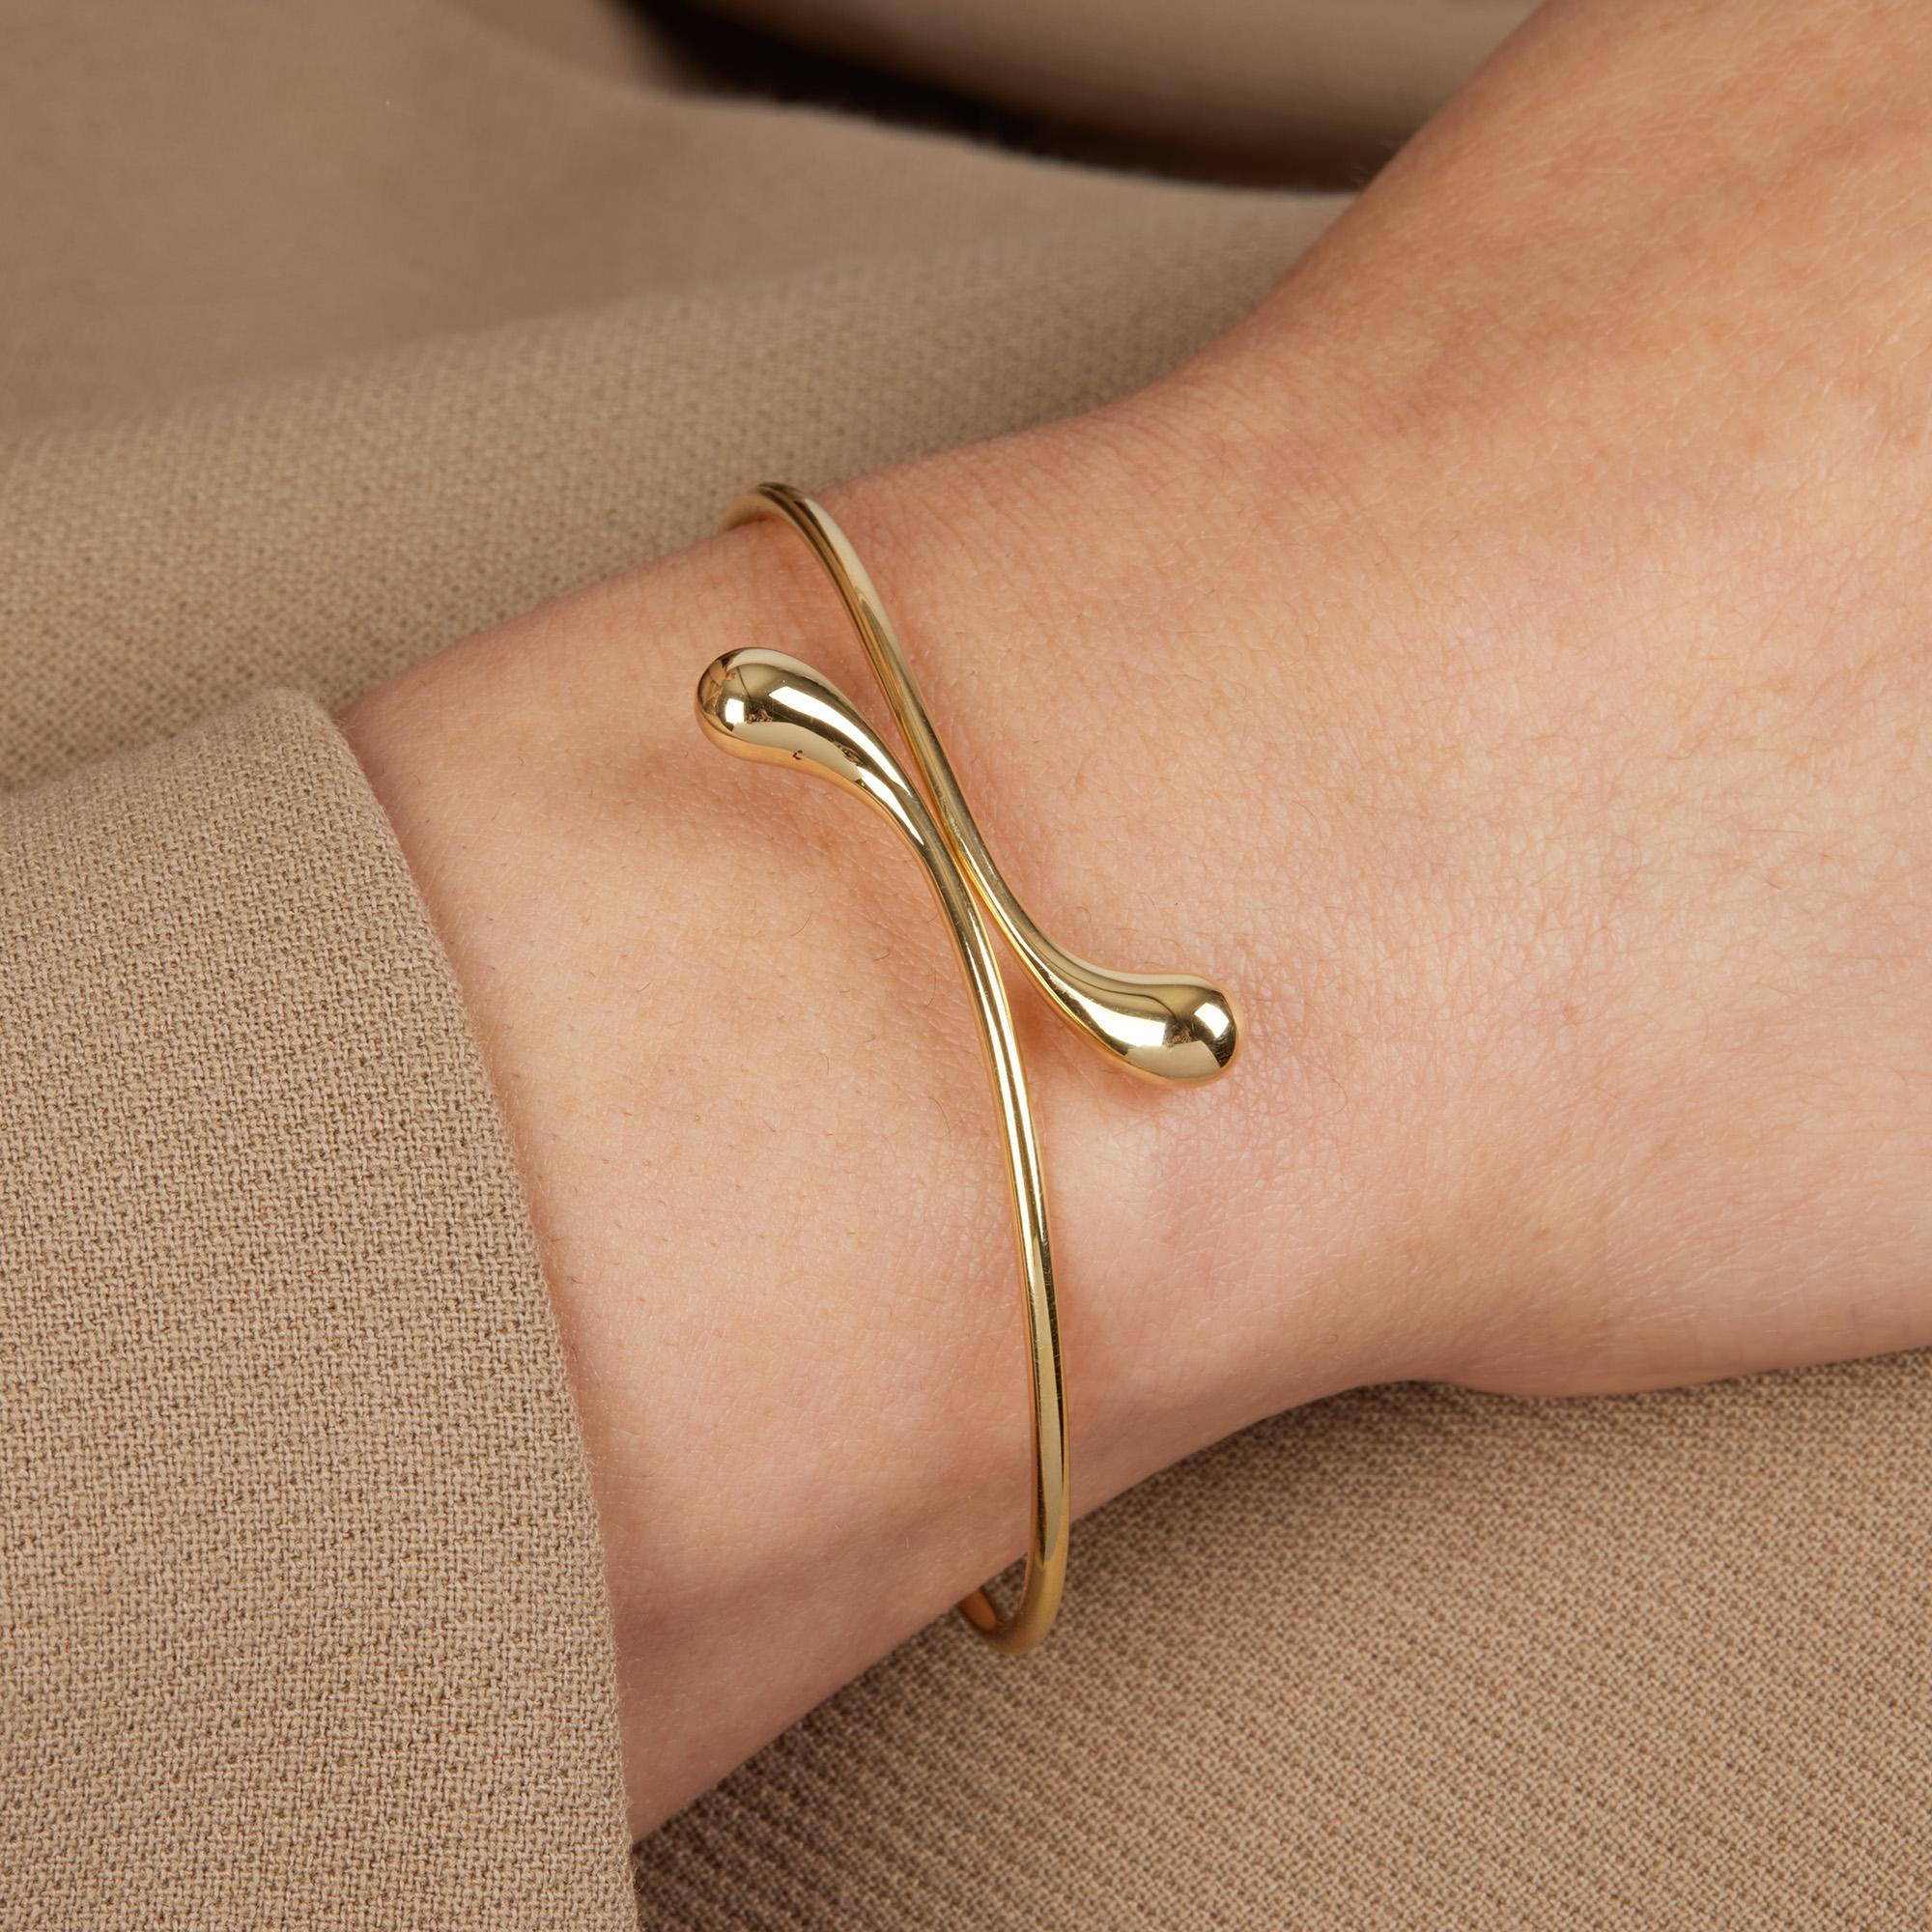 This bangle by Tiffany & Co. is from their Elsa Peretti Collection and features a teardrop design in 18ct gold. Accompanied by a Xupes Presentation Box. Our Xupes reference is J926 should you need to quote this.
RP	£3,000
ITEM